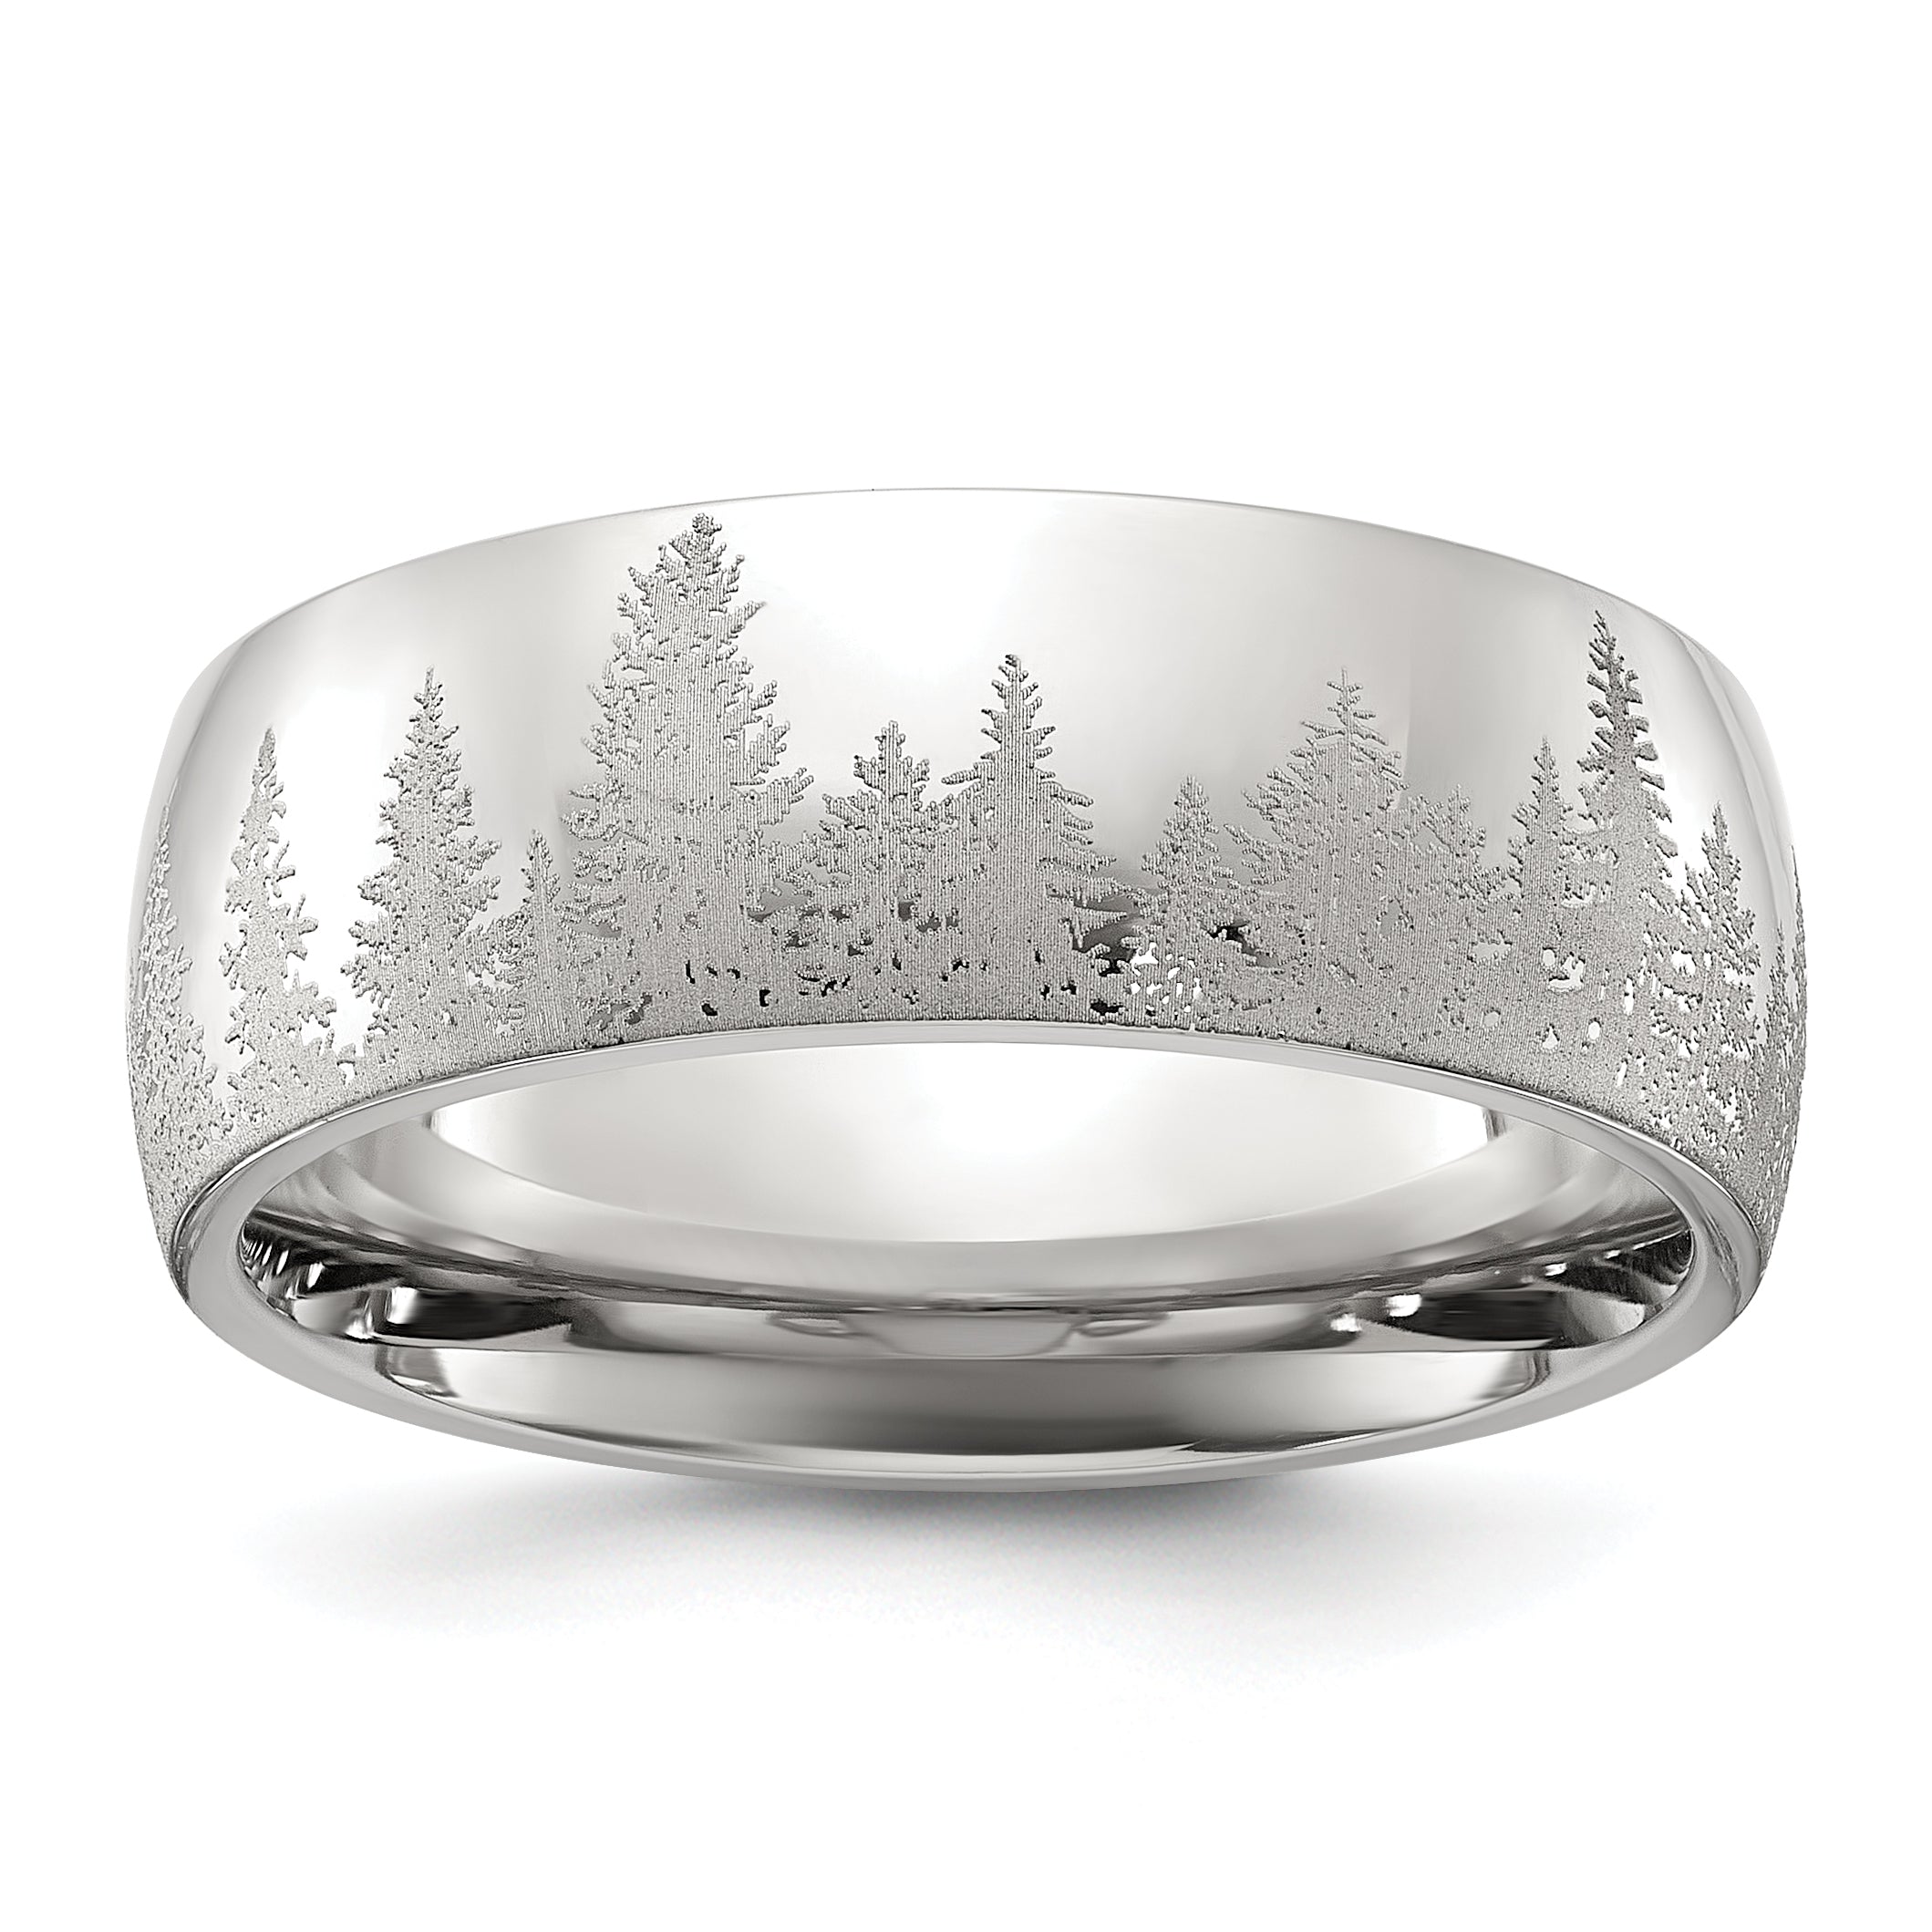 Stainless Steel Polished with Lasered Tree Design 8mm Band